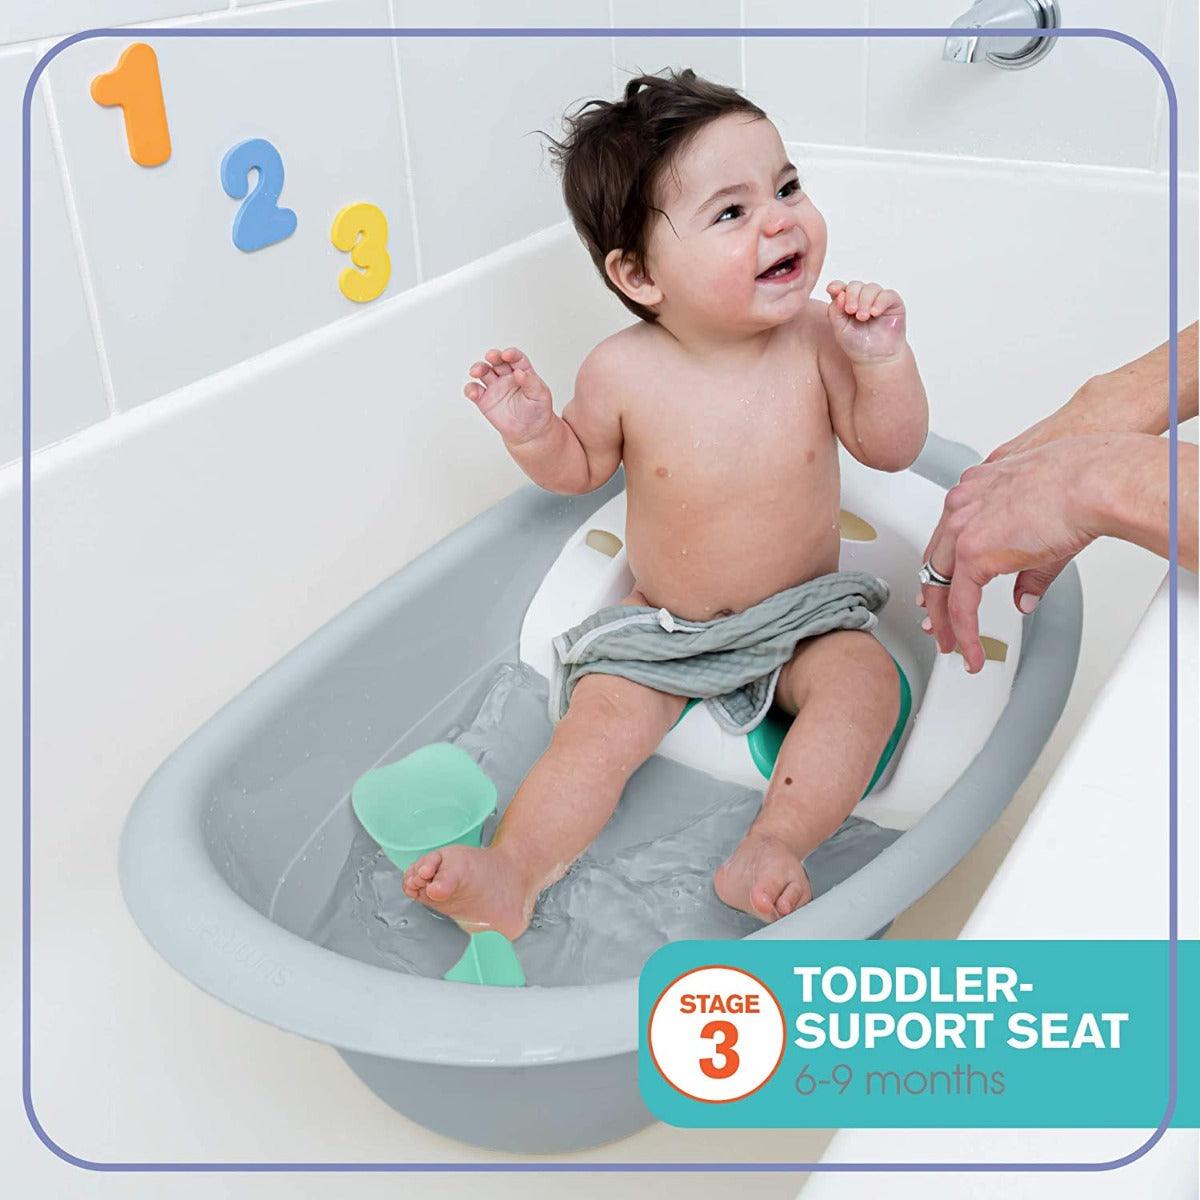 Summer Infant Gentle Support Multi-Stage Bath Tub Neutral - Bath Tub For Ages 0-12 Months